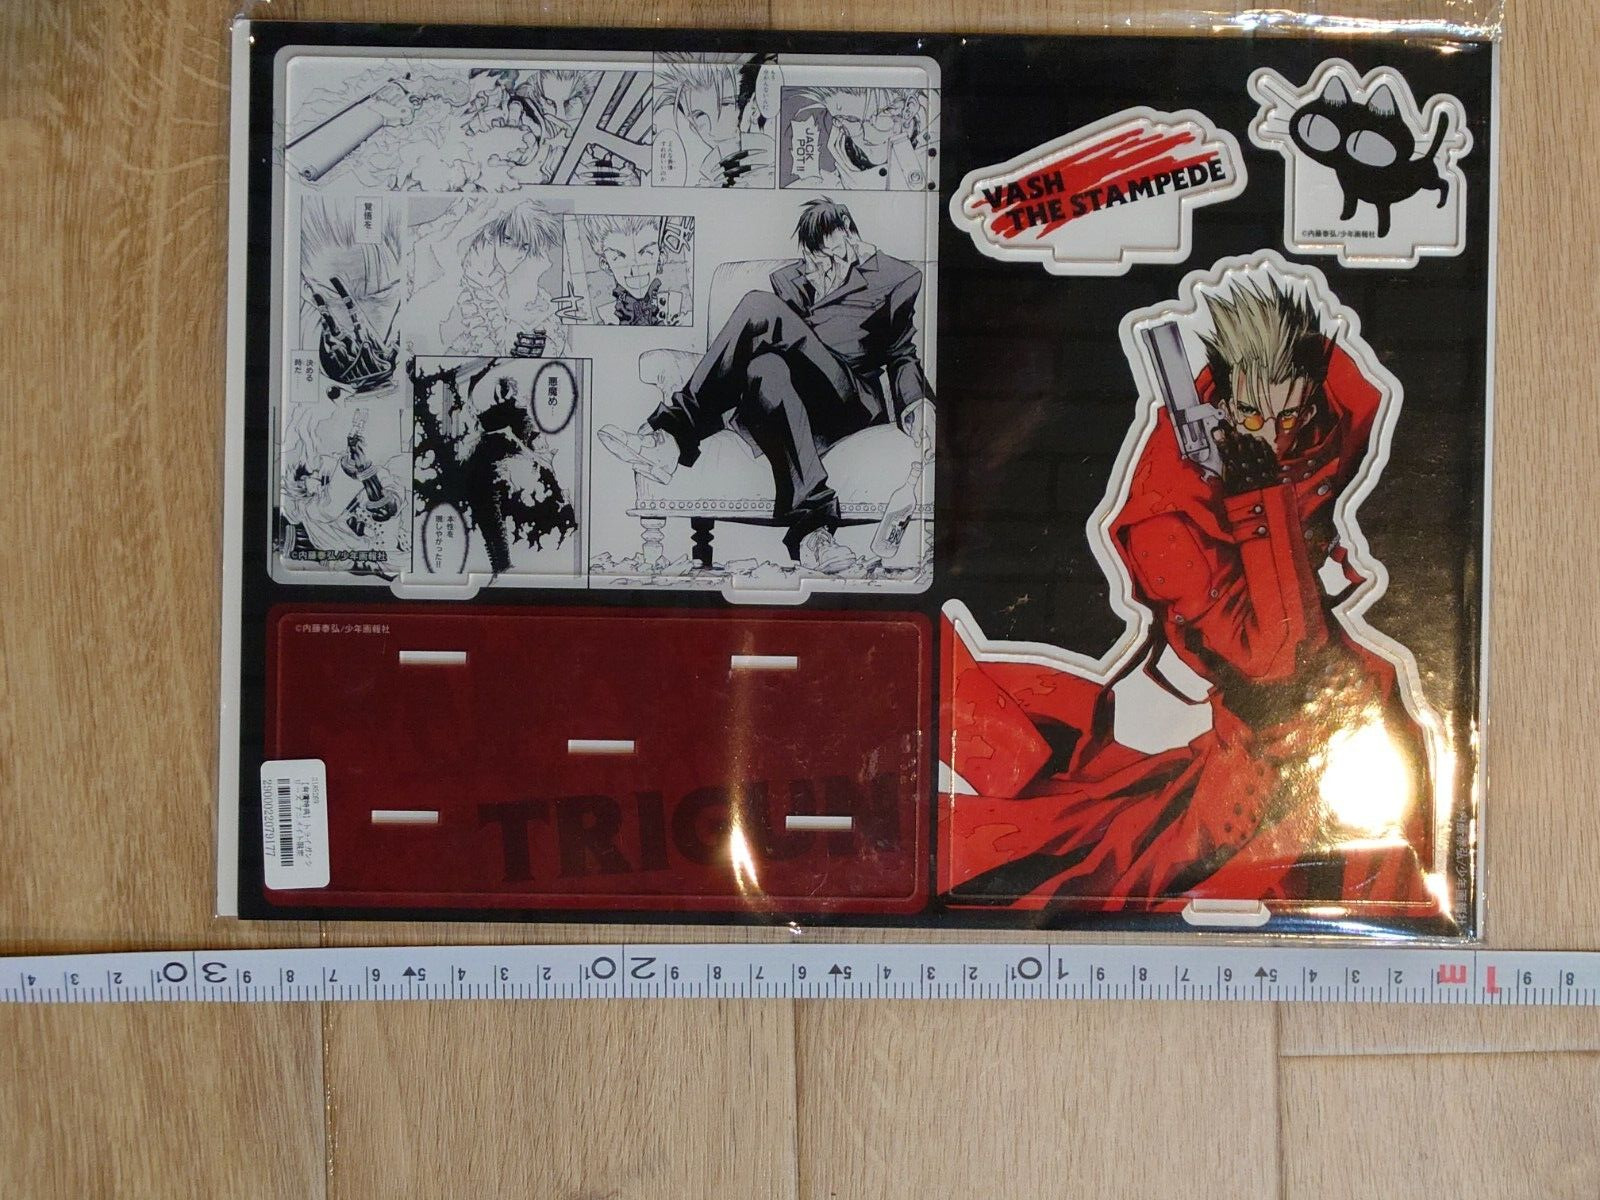 # 【Mega Size】 Trigun trading acrylic stand Vasch Shipping Welcome  30cm x 21 cm